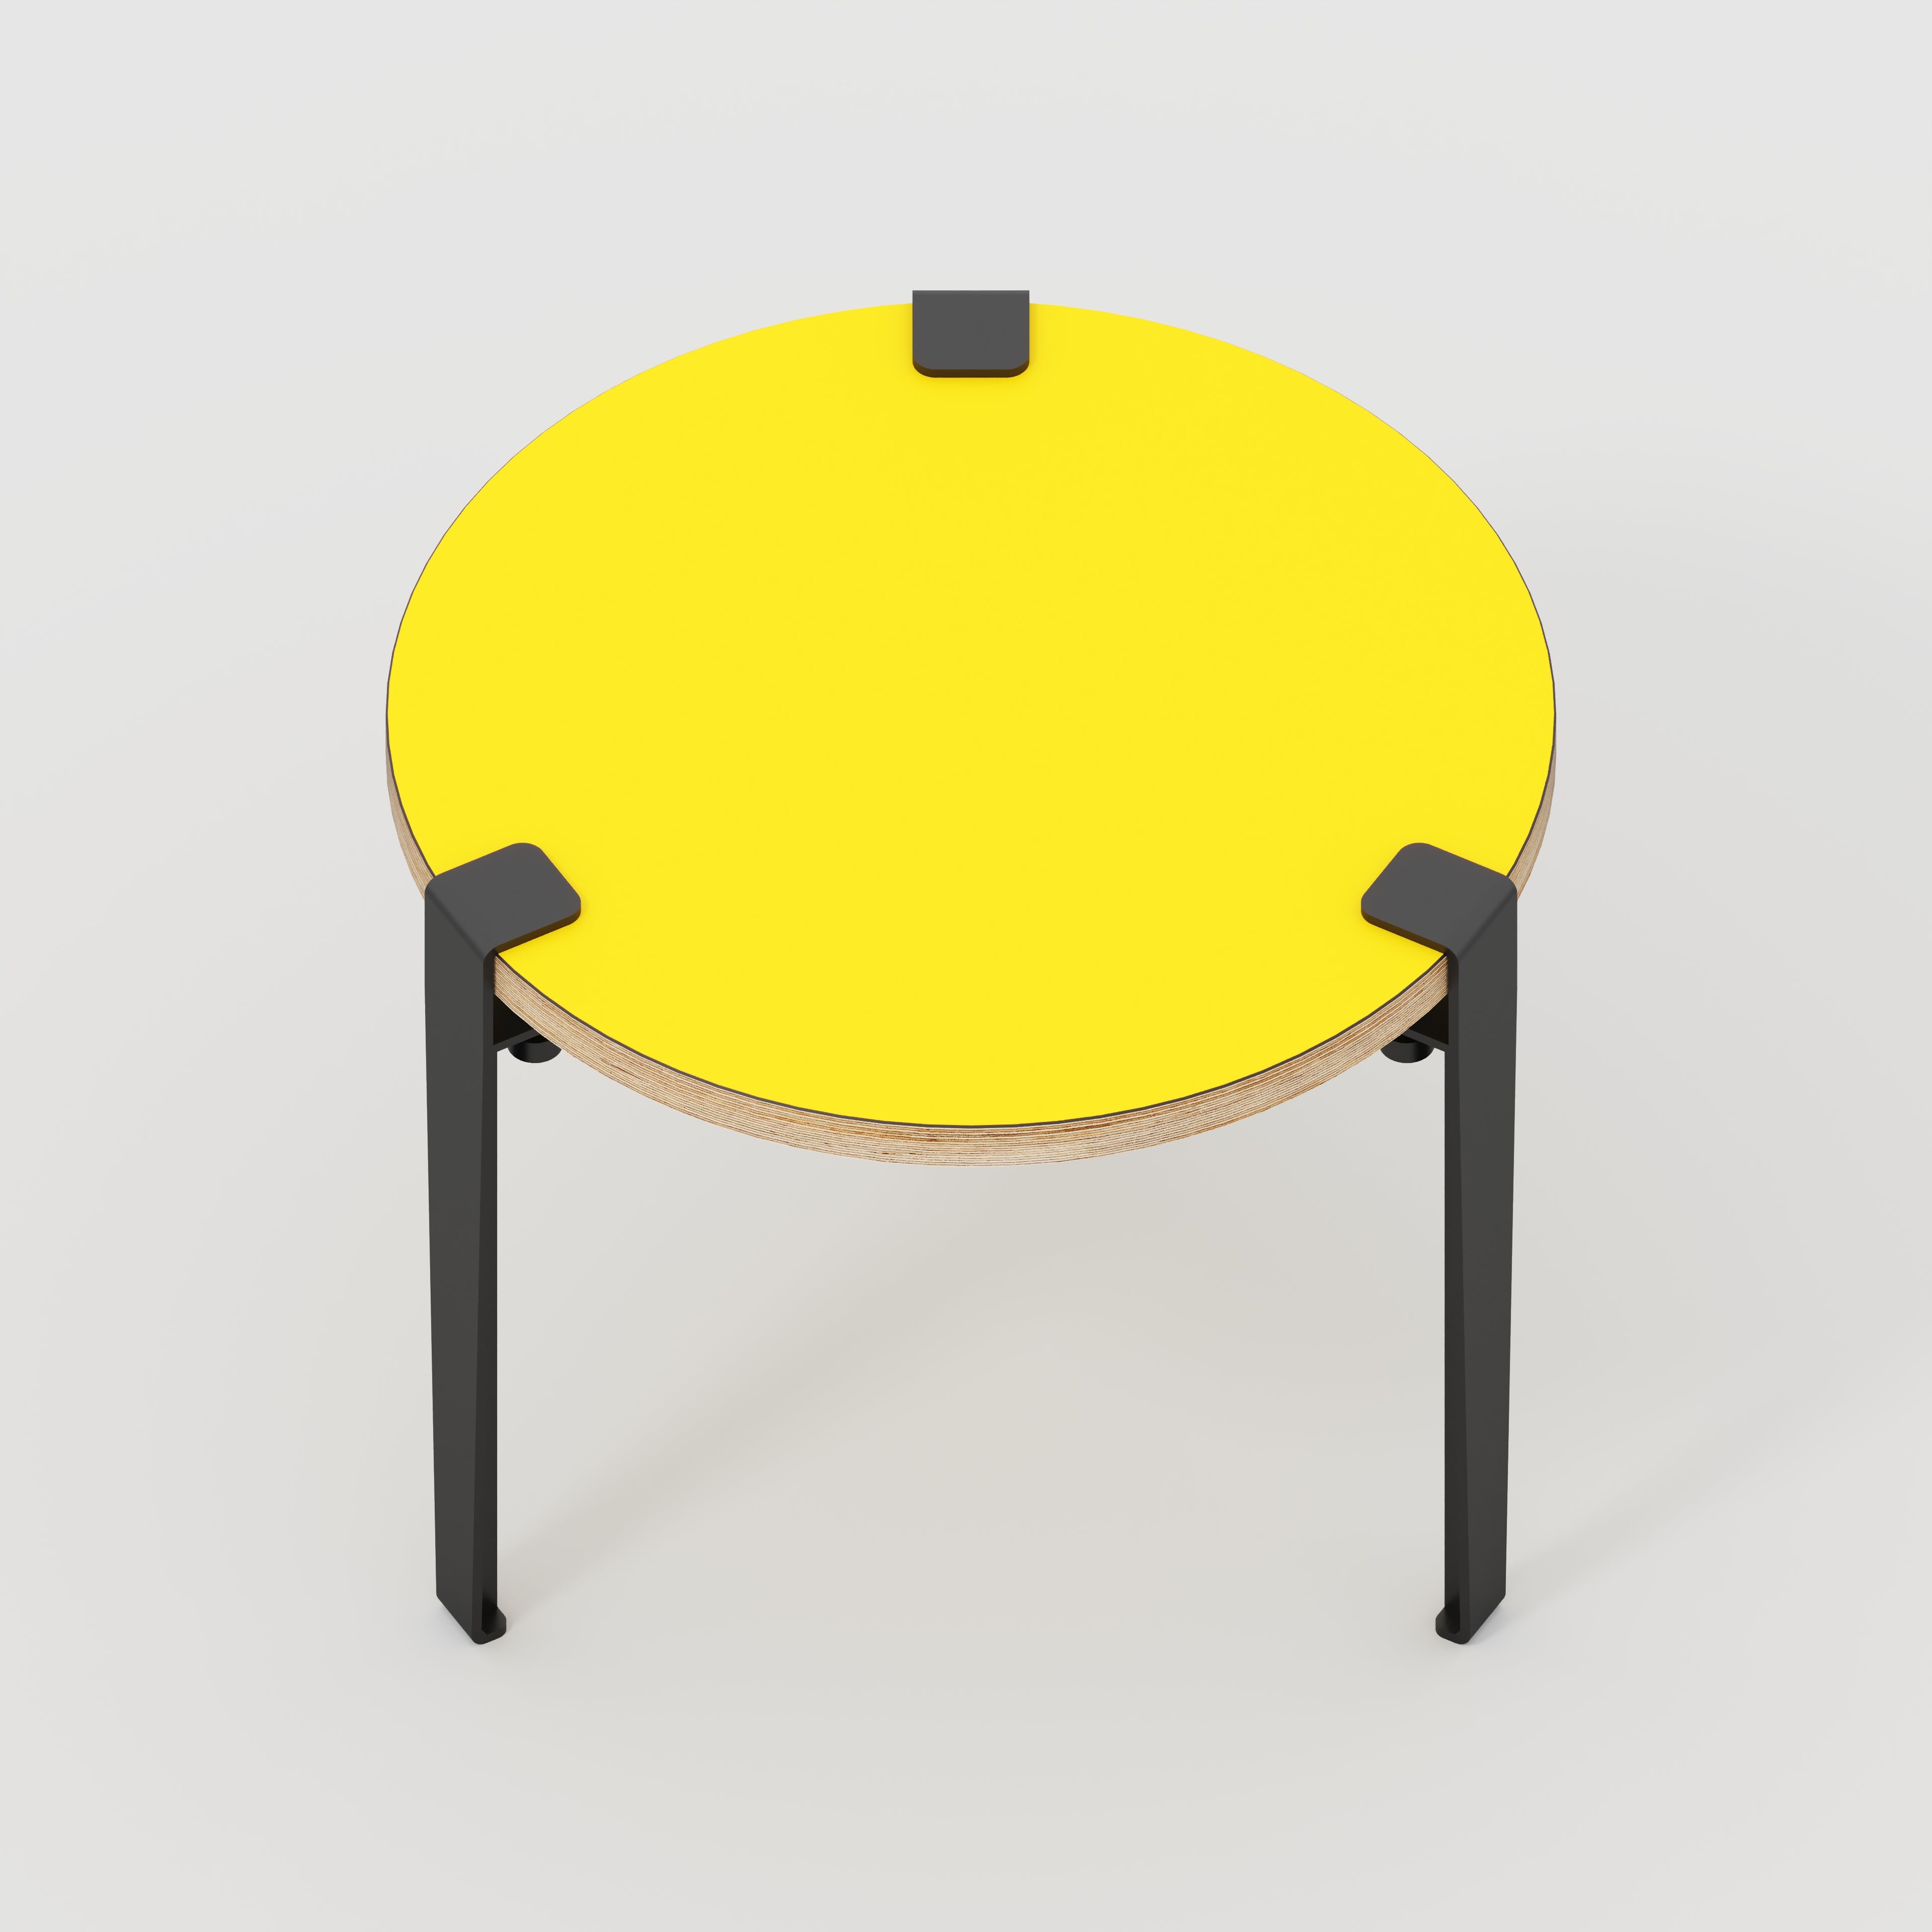 Round Side Table with Black Tiptoe Legs - Formica Chrome Yellow - 500(dia) x 430(h)